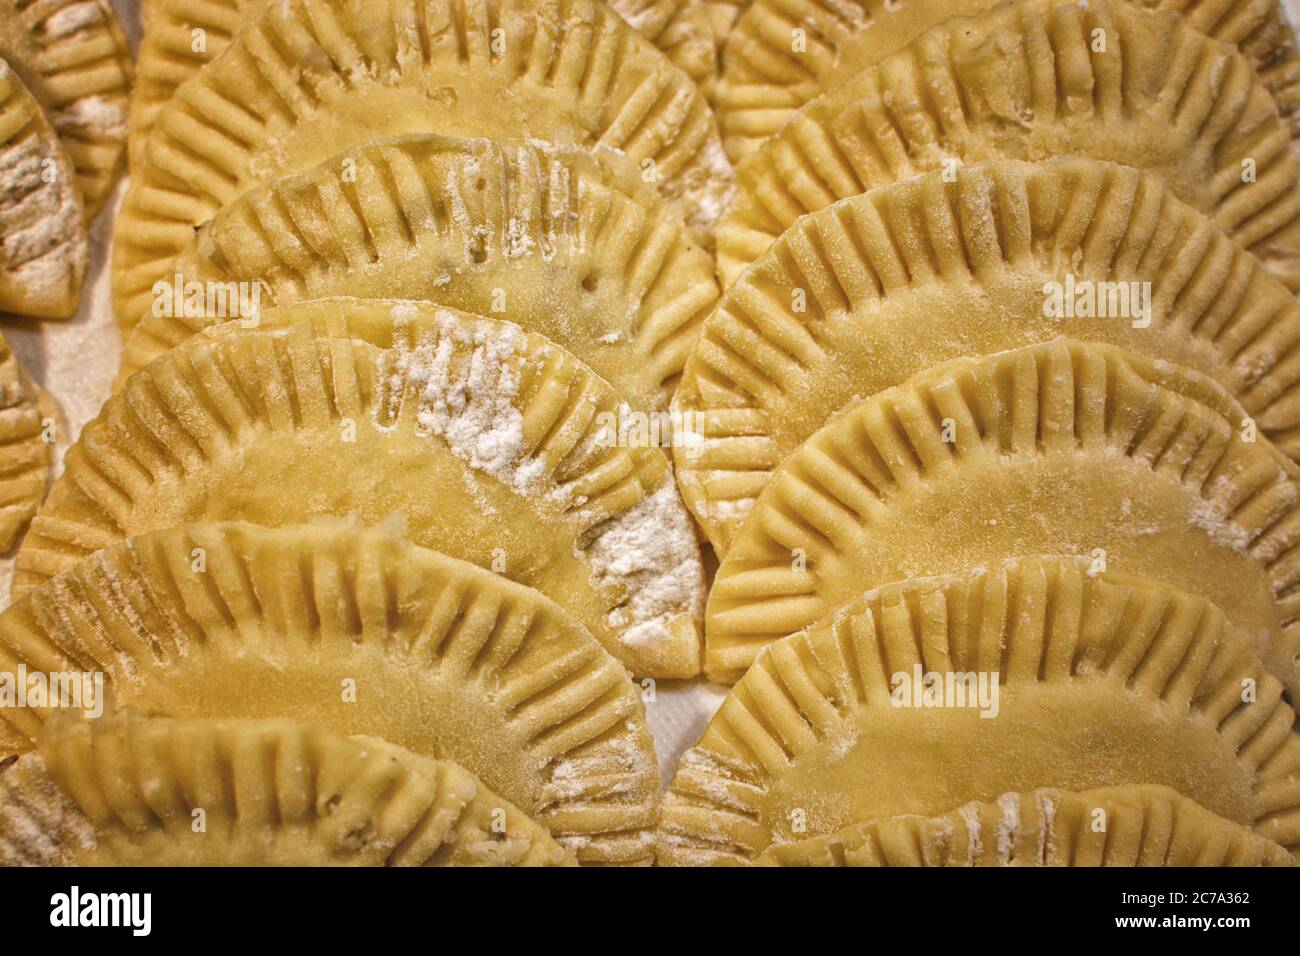 Rows of uncooked pierogies waiting to be fried. Stock Photo